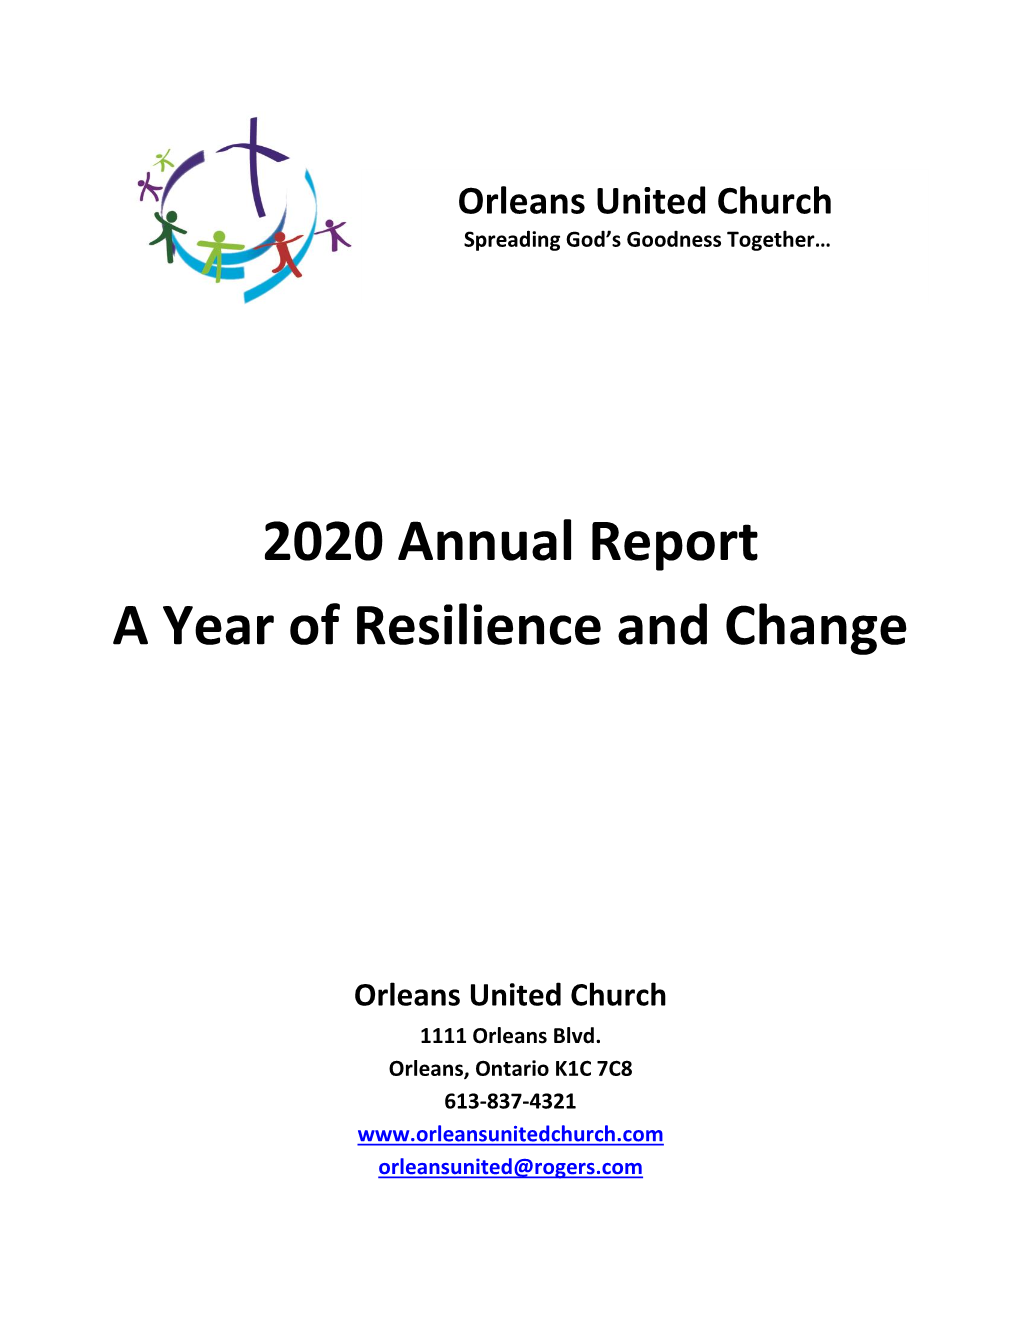 2020 Annual Report a Year of Resilience and Change